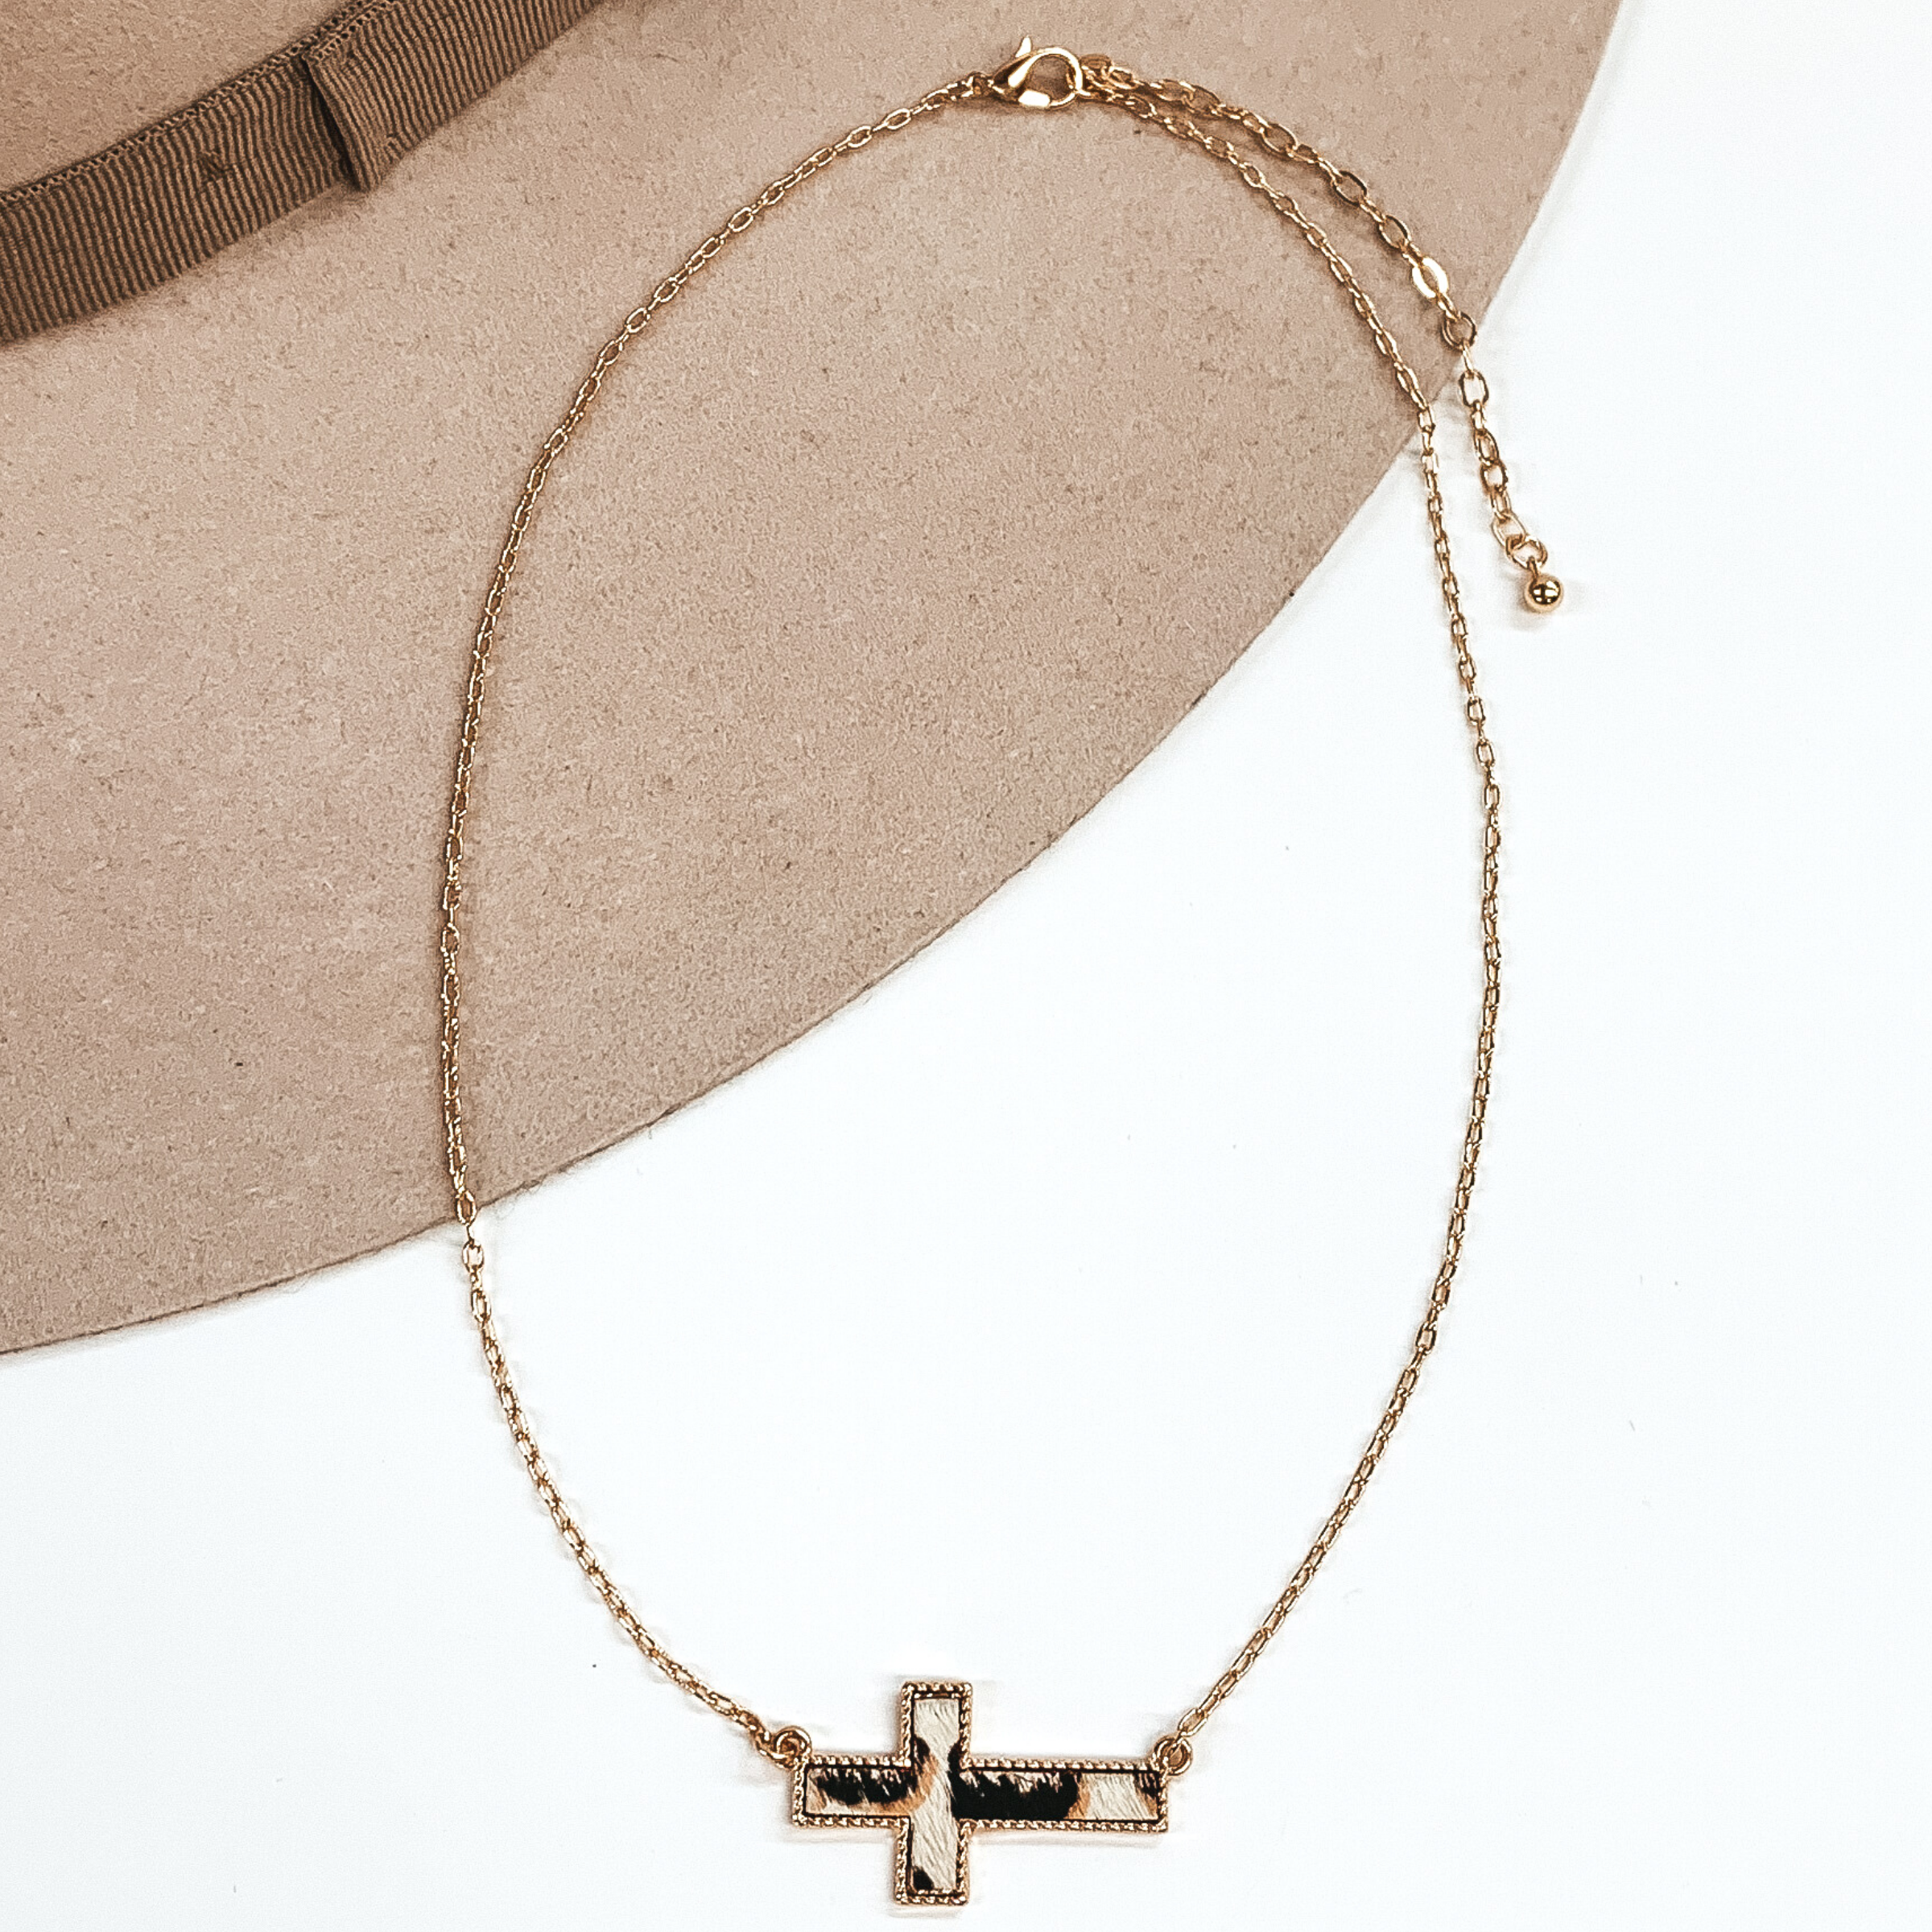 Gold paperclip chain with a cross pendant. The pendant has a white hide inlay with an animal print. This necklace is pictured on a white and beige background.